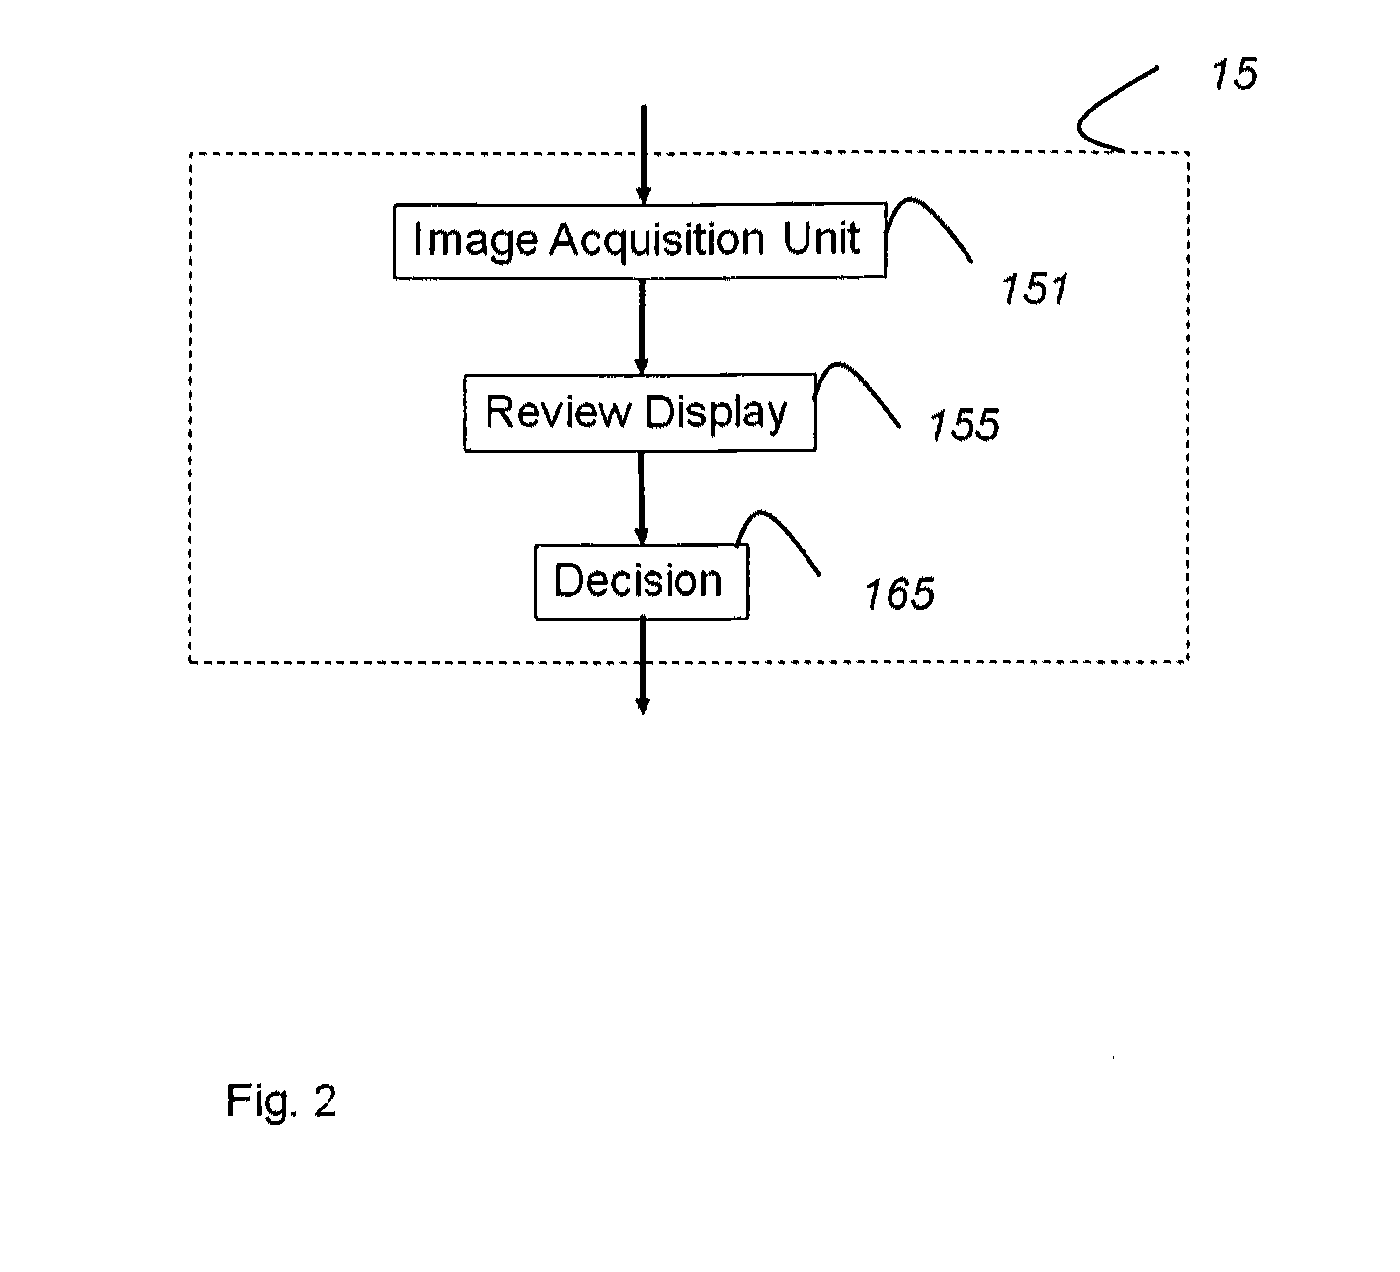 Method, material, and apparatus to improve acquisition of human frontal face images using image template